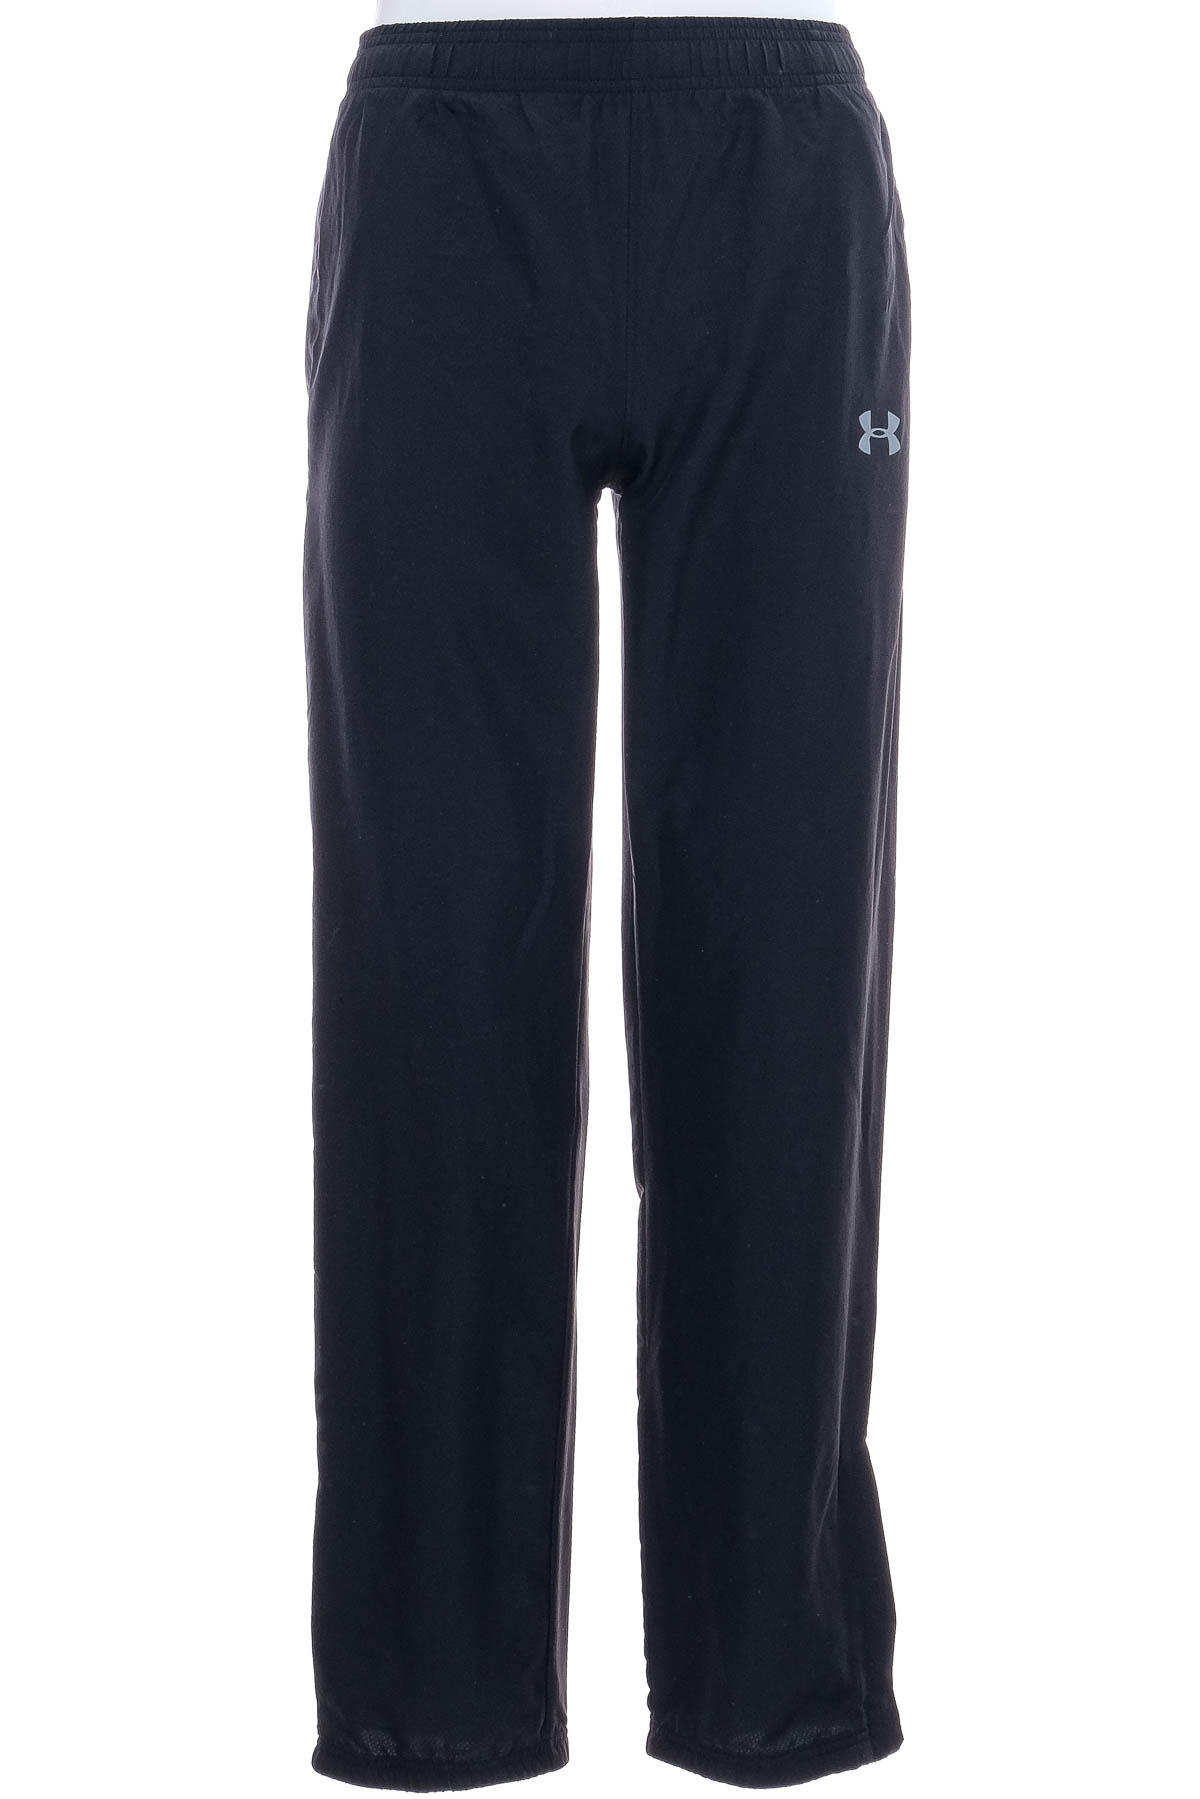 Track Bottoms for Boy - UNDER ARMOUR - 0